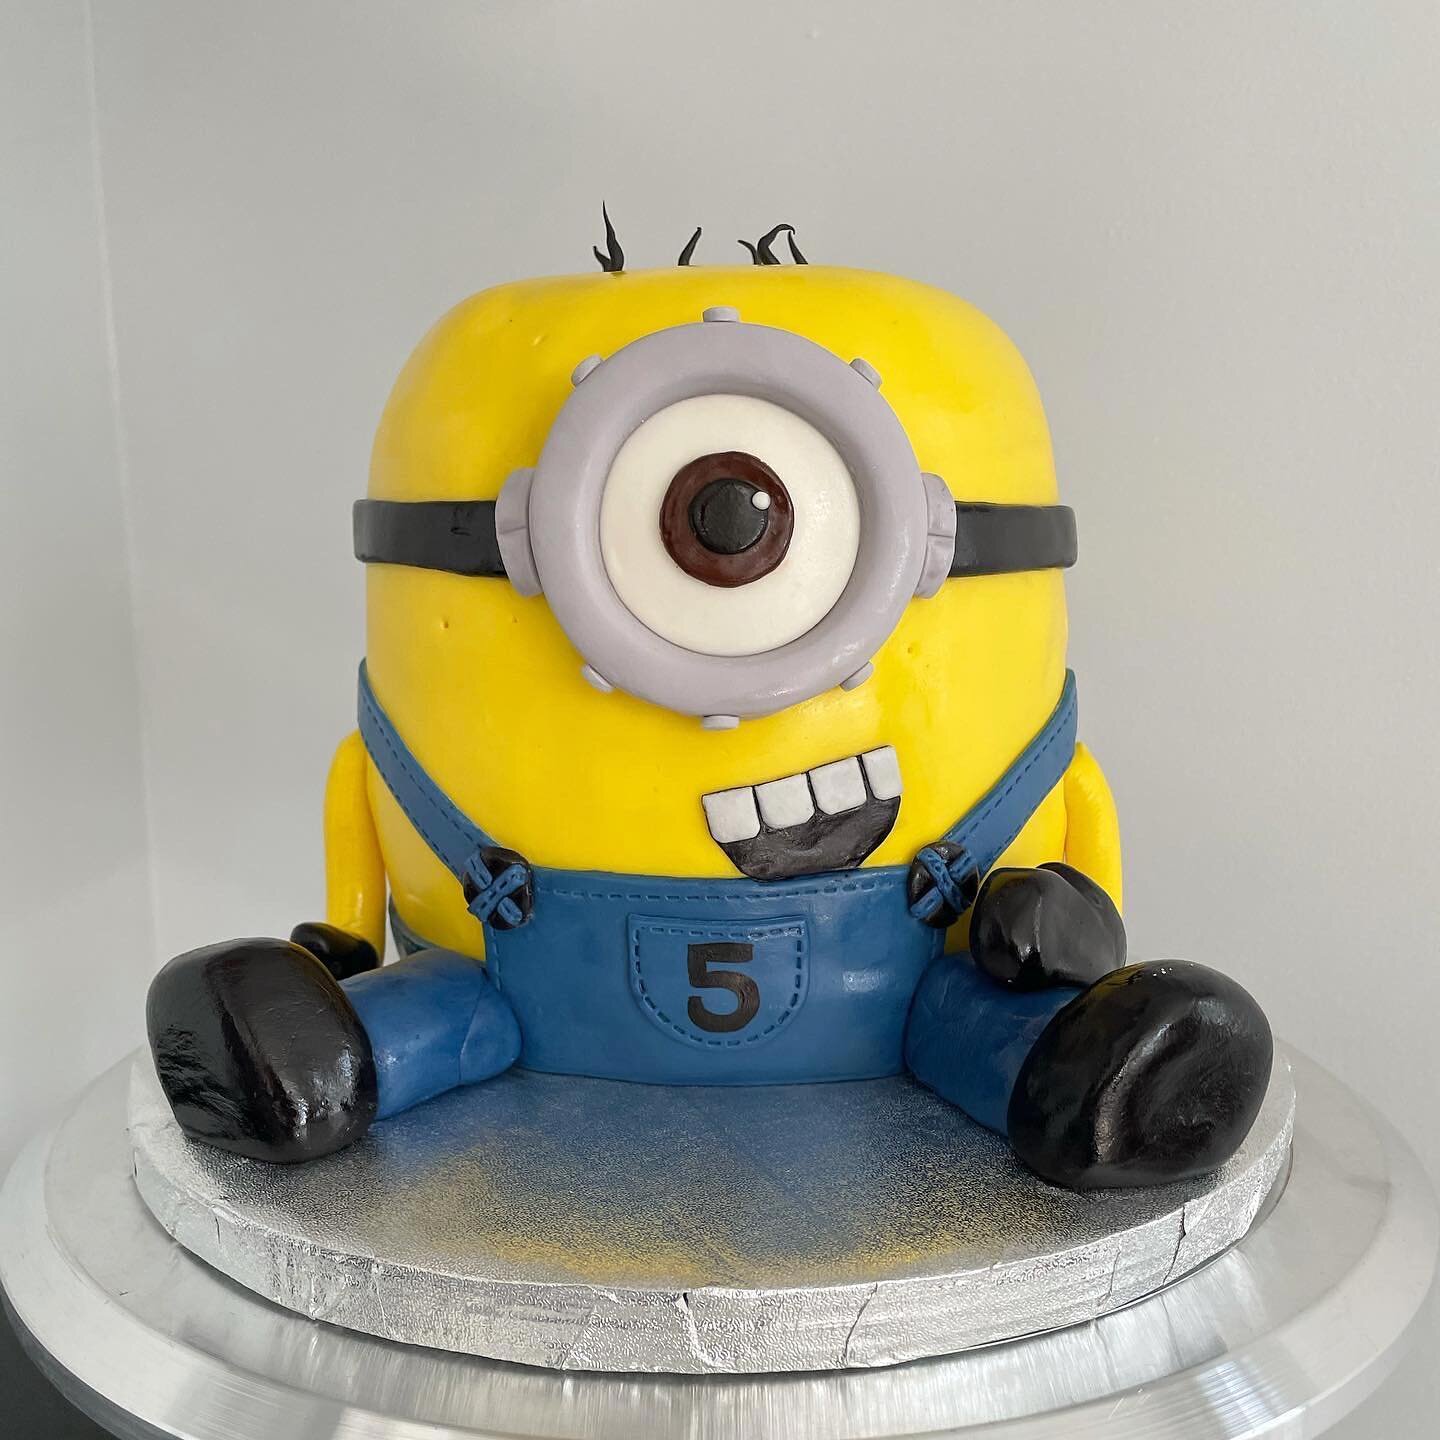 No despicable #minions here! This little dood is vanilla buttermilk cake, strawberry jam, strawberry buttercream filling and decorated with our homemade #marshmallow #fondant 

#cake #cakes #cakesofinstagram #cakestagram #cakesofig #cakesofinsta #yum